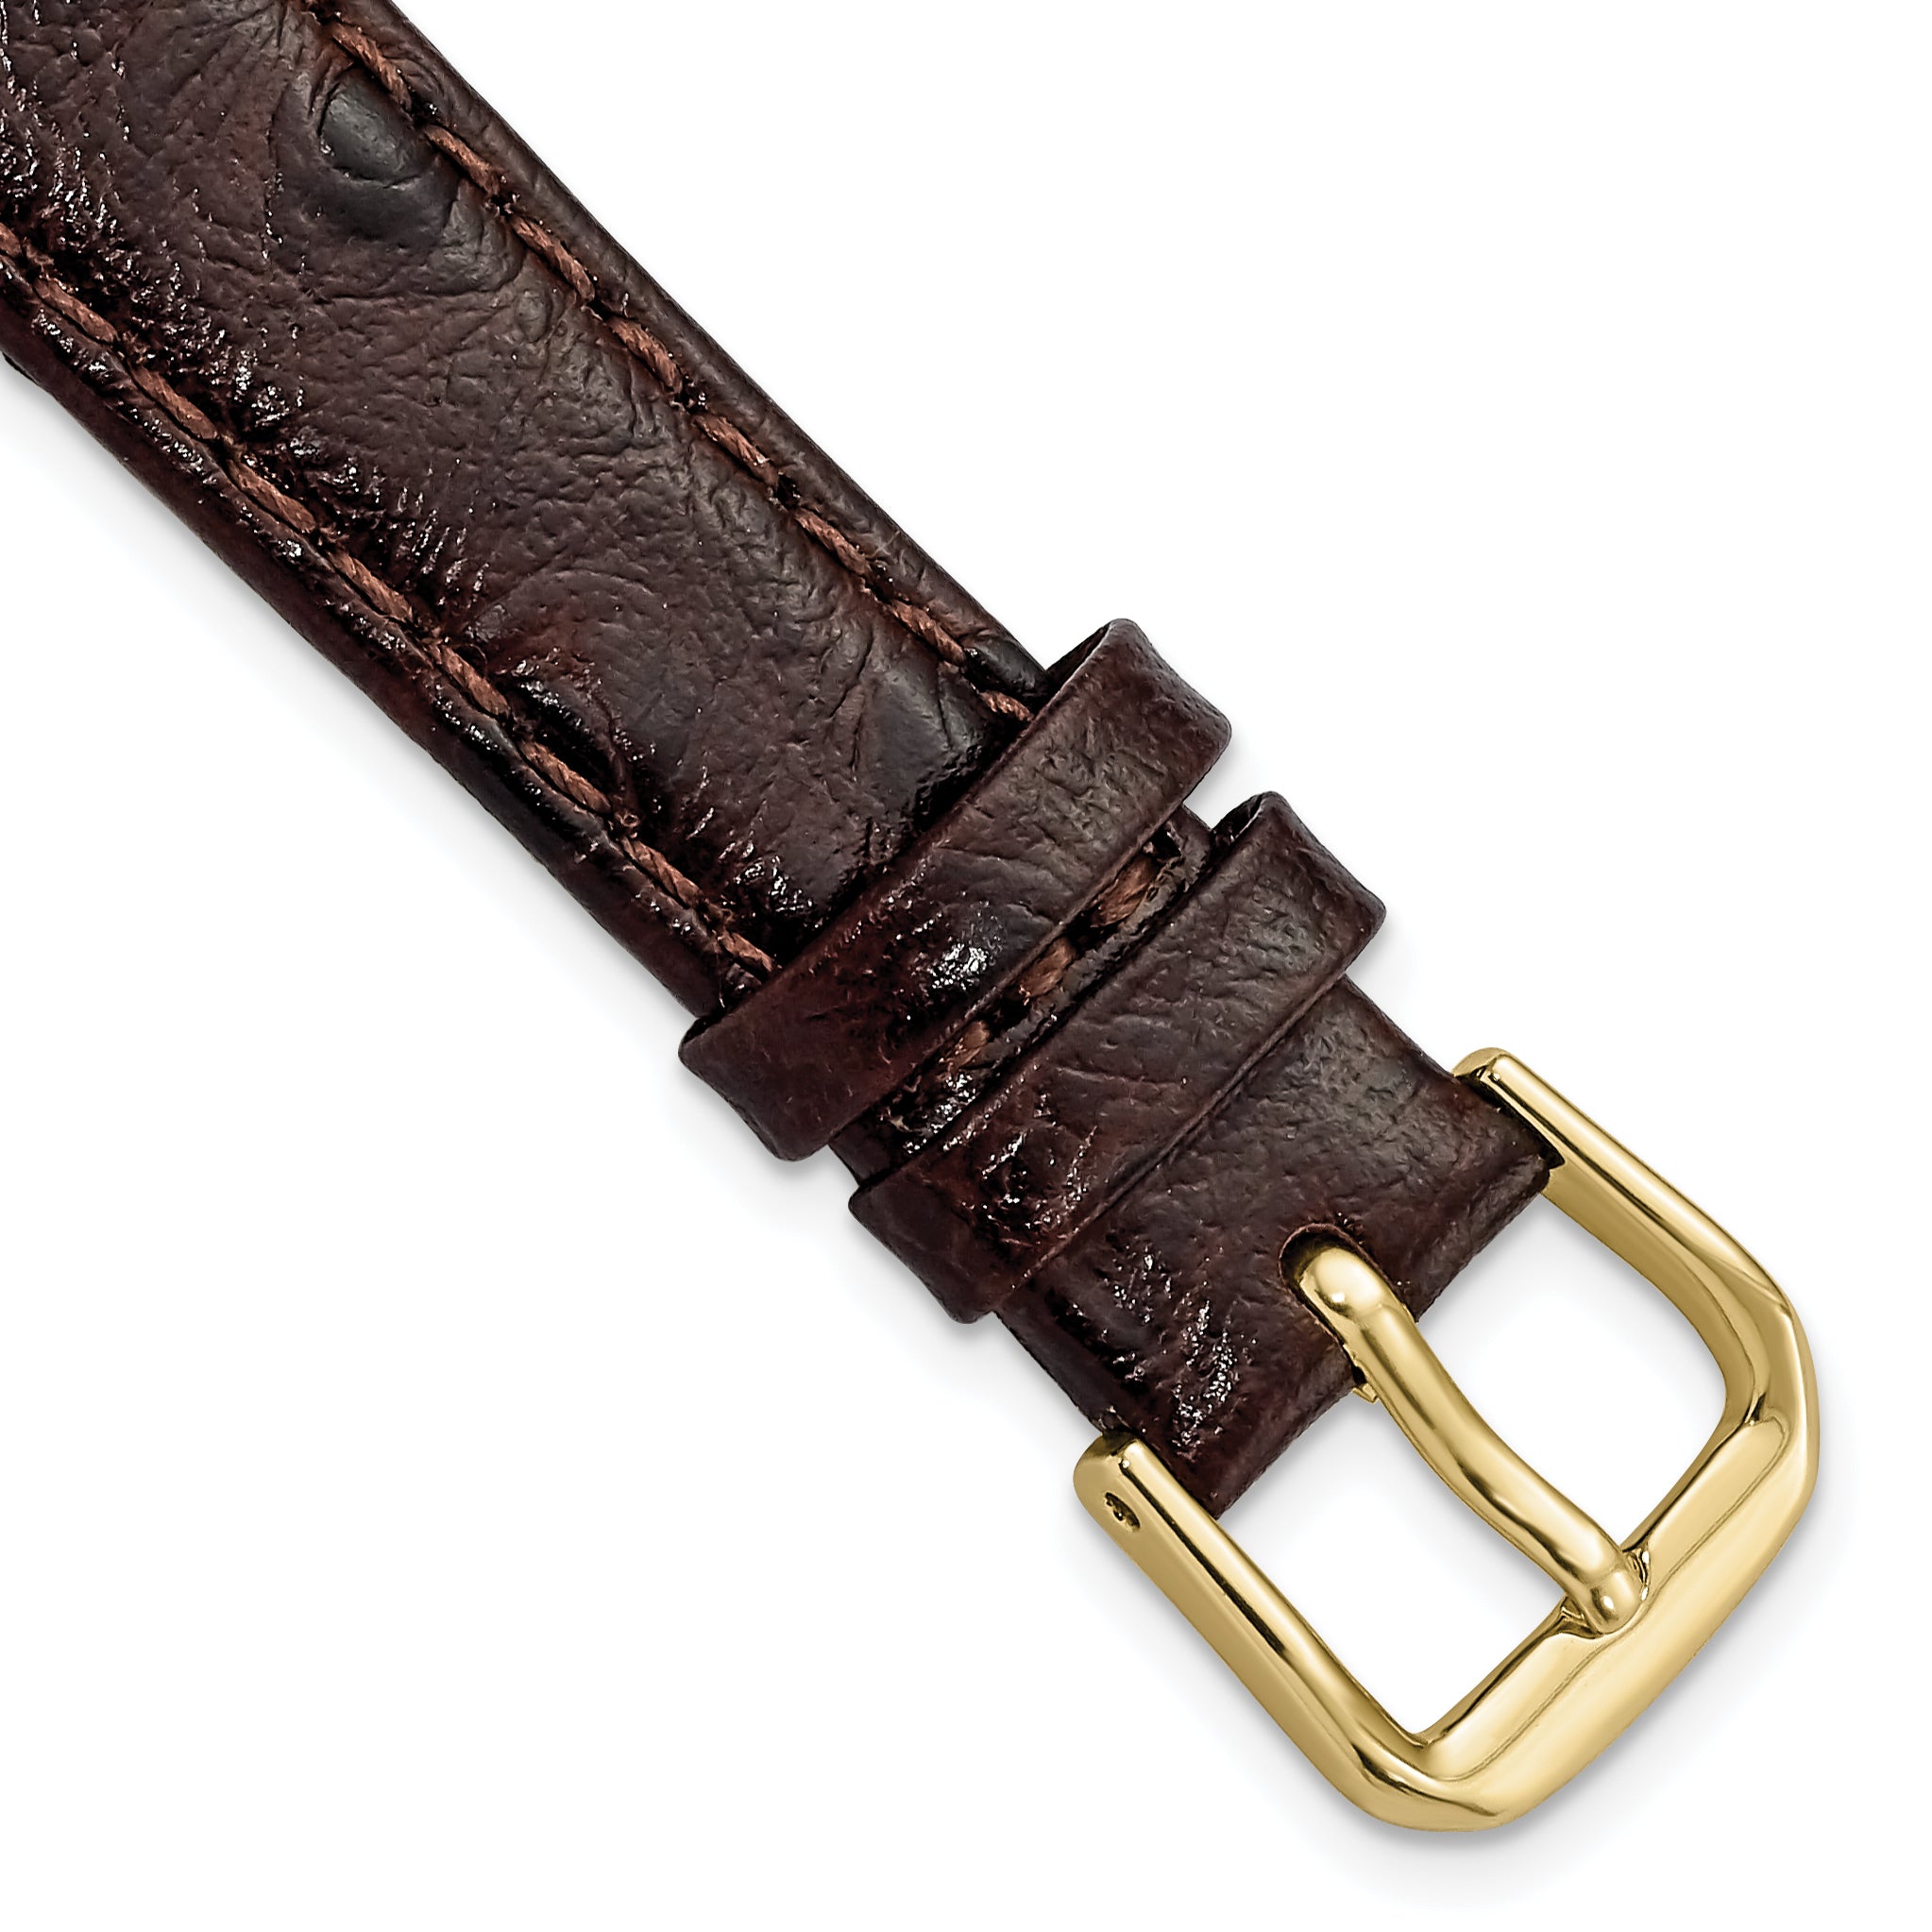 DeBeer 14mm Brown Ostrich Grain Leather with Gold-tone Buckle 6.75 inch Watch Band